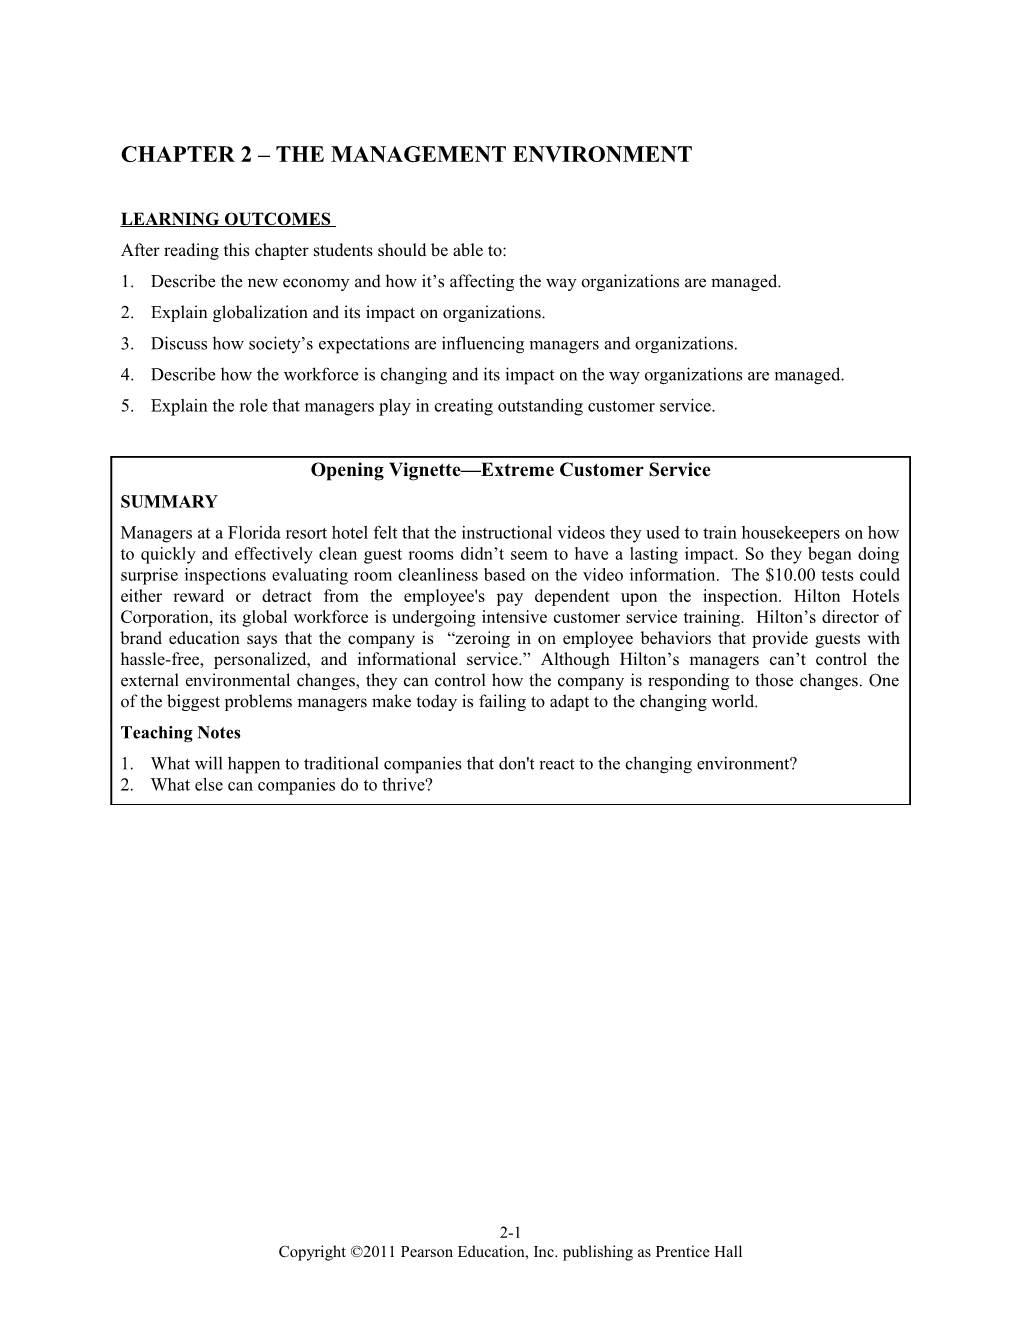 CHAPTER 2 - the Management Environment